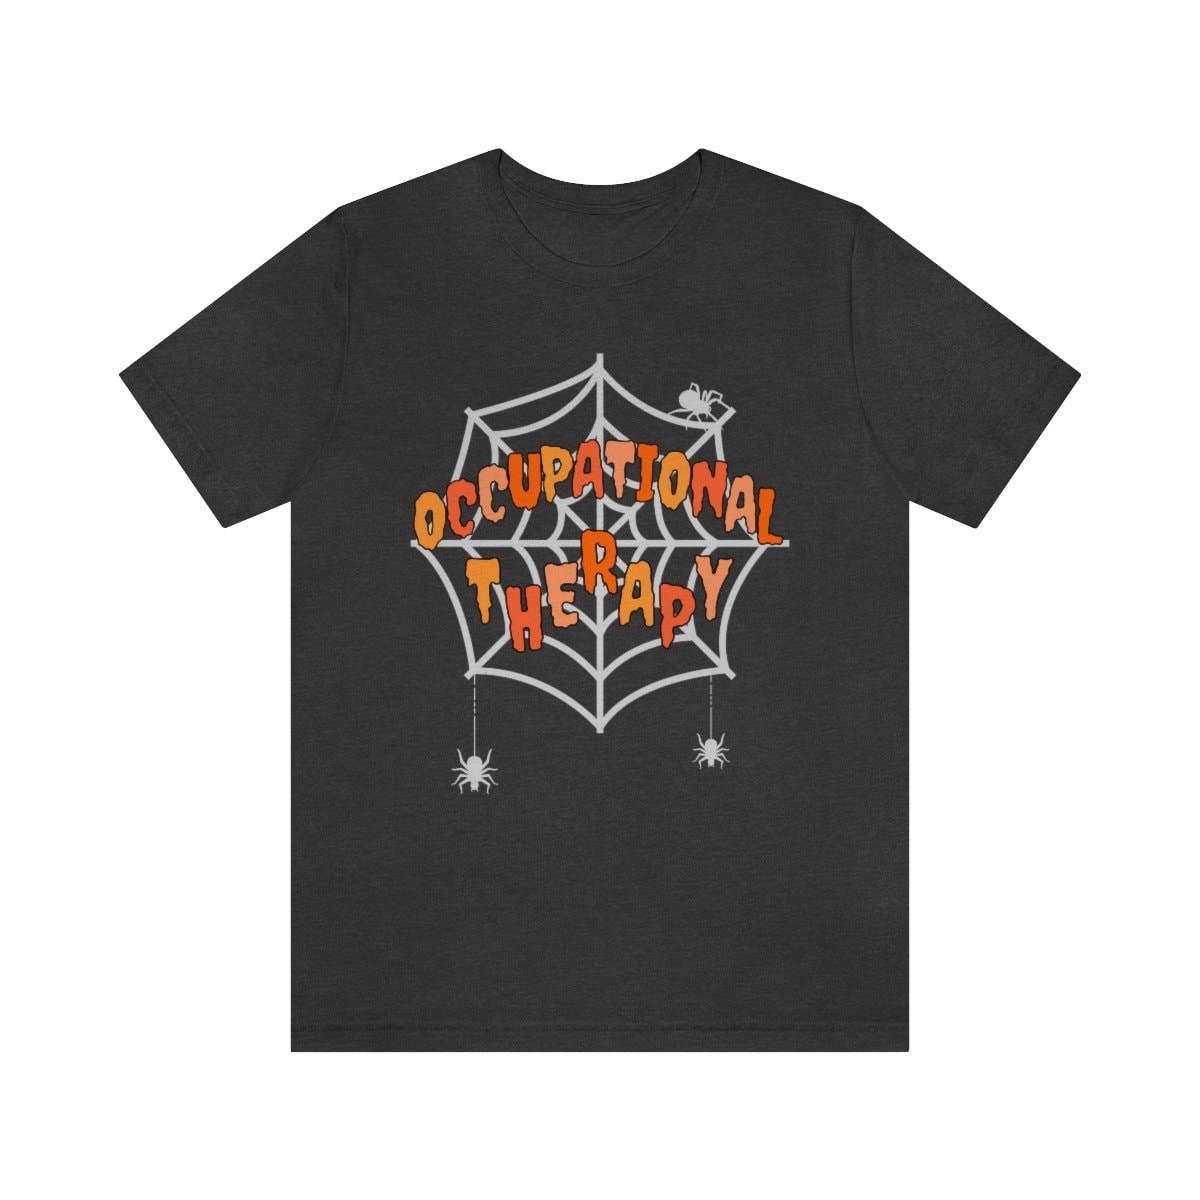 Discover Halloween Occupational Therapy Shirt Occupational Therapy TShirt OT Shirts OT Shirt Occupational Therapist Shirt OT Shirt Therapy Gift